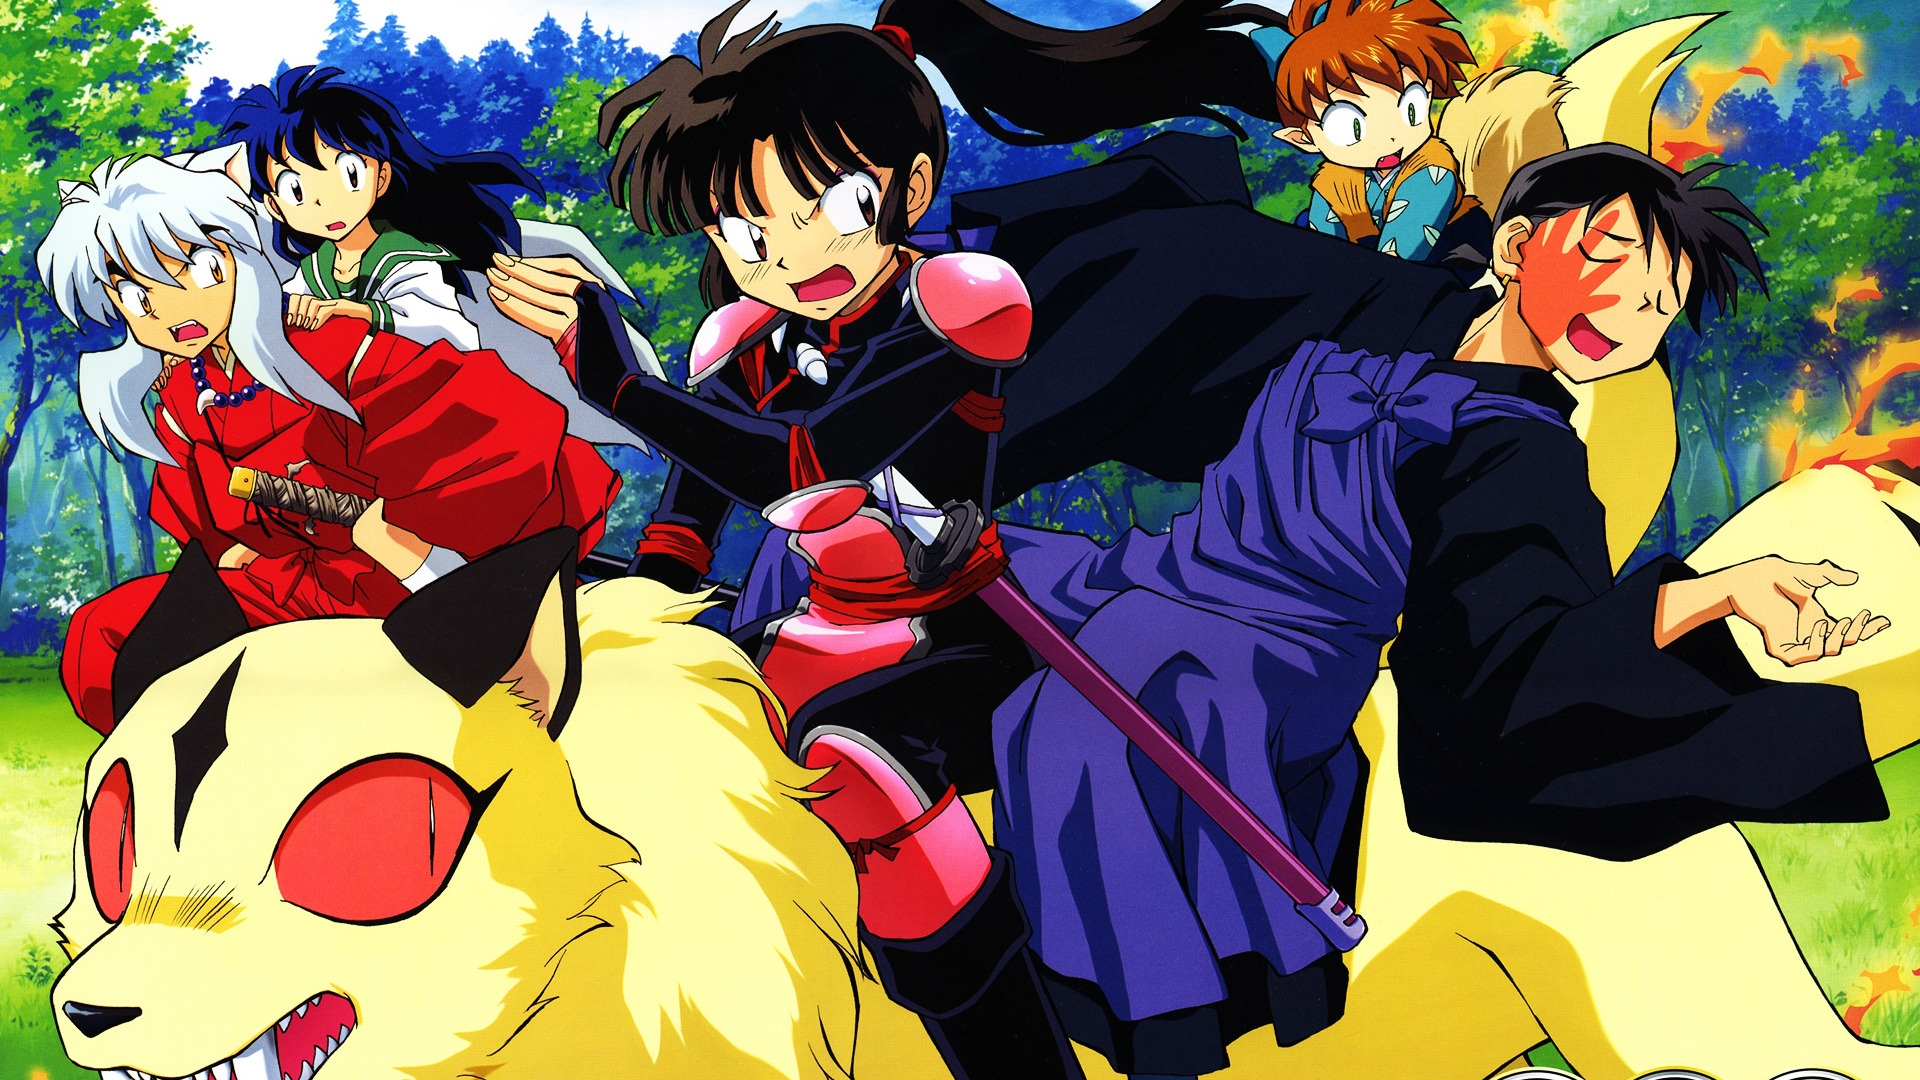 Inuyasha Characters for 1920 x 1080 HDTV 1080p resolution